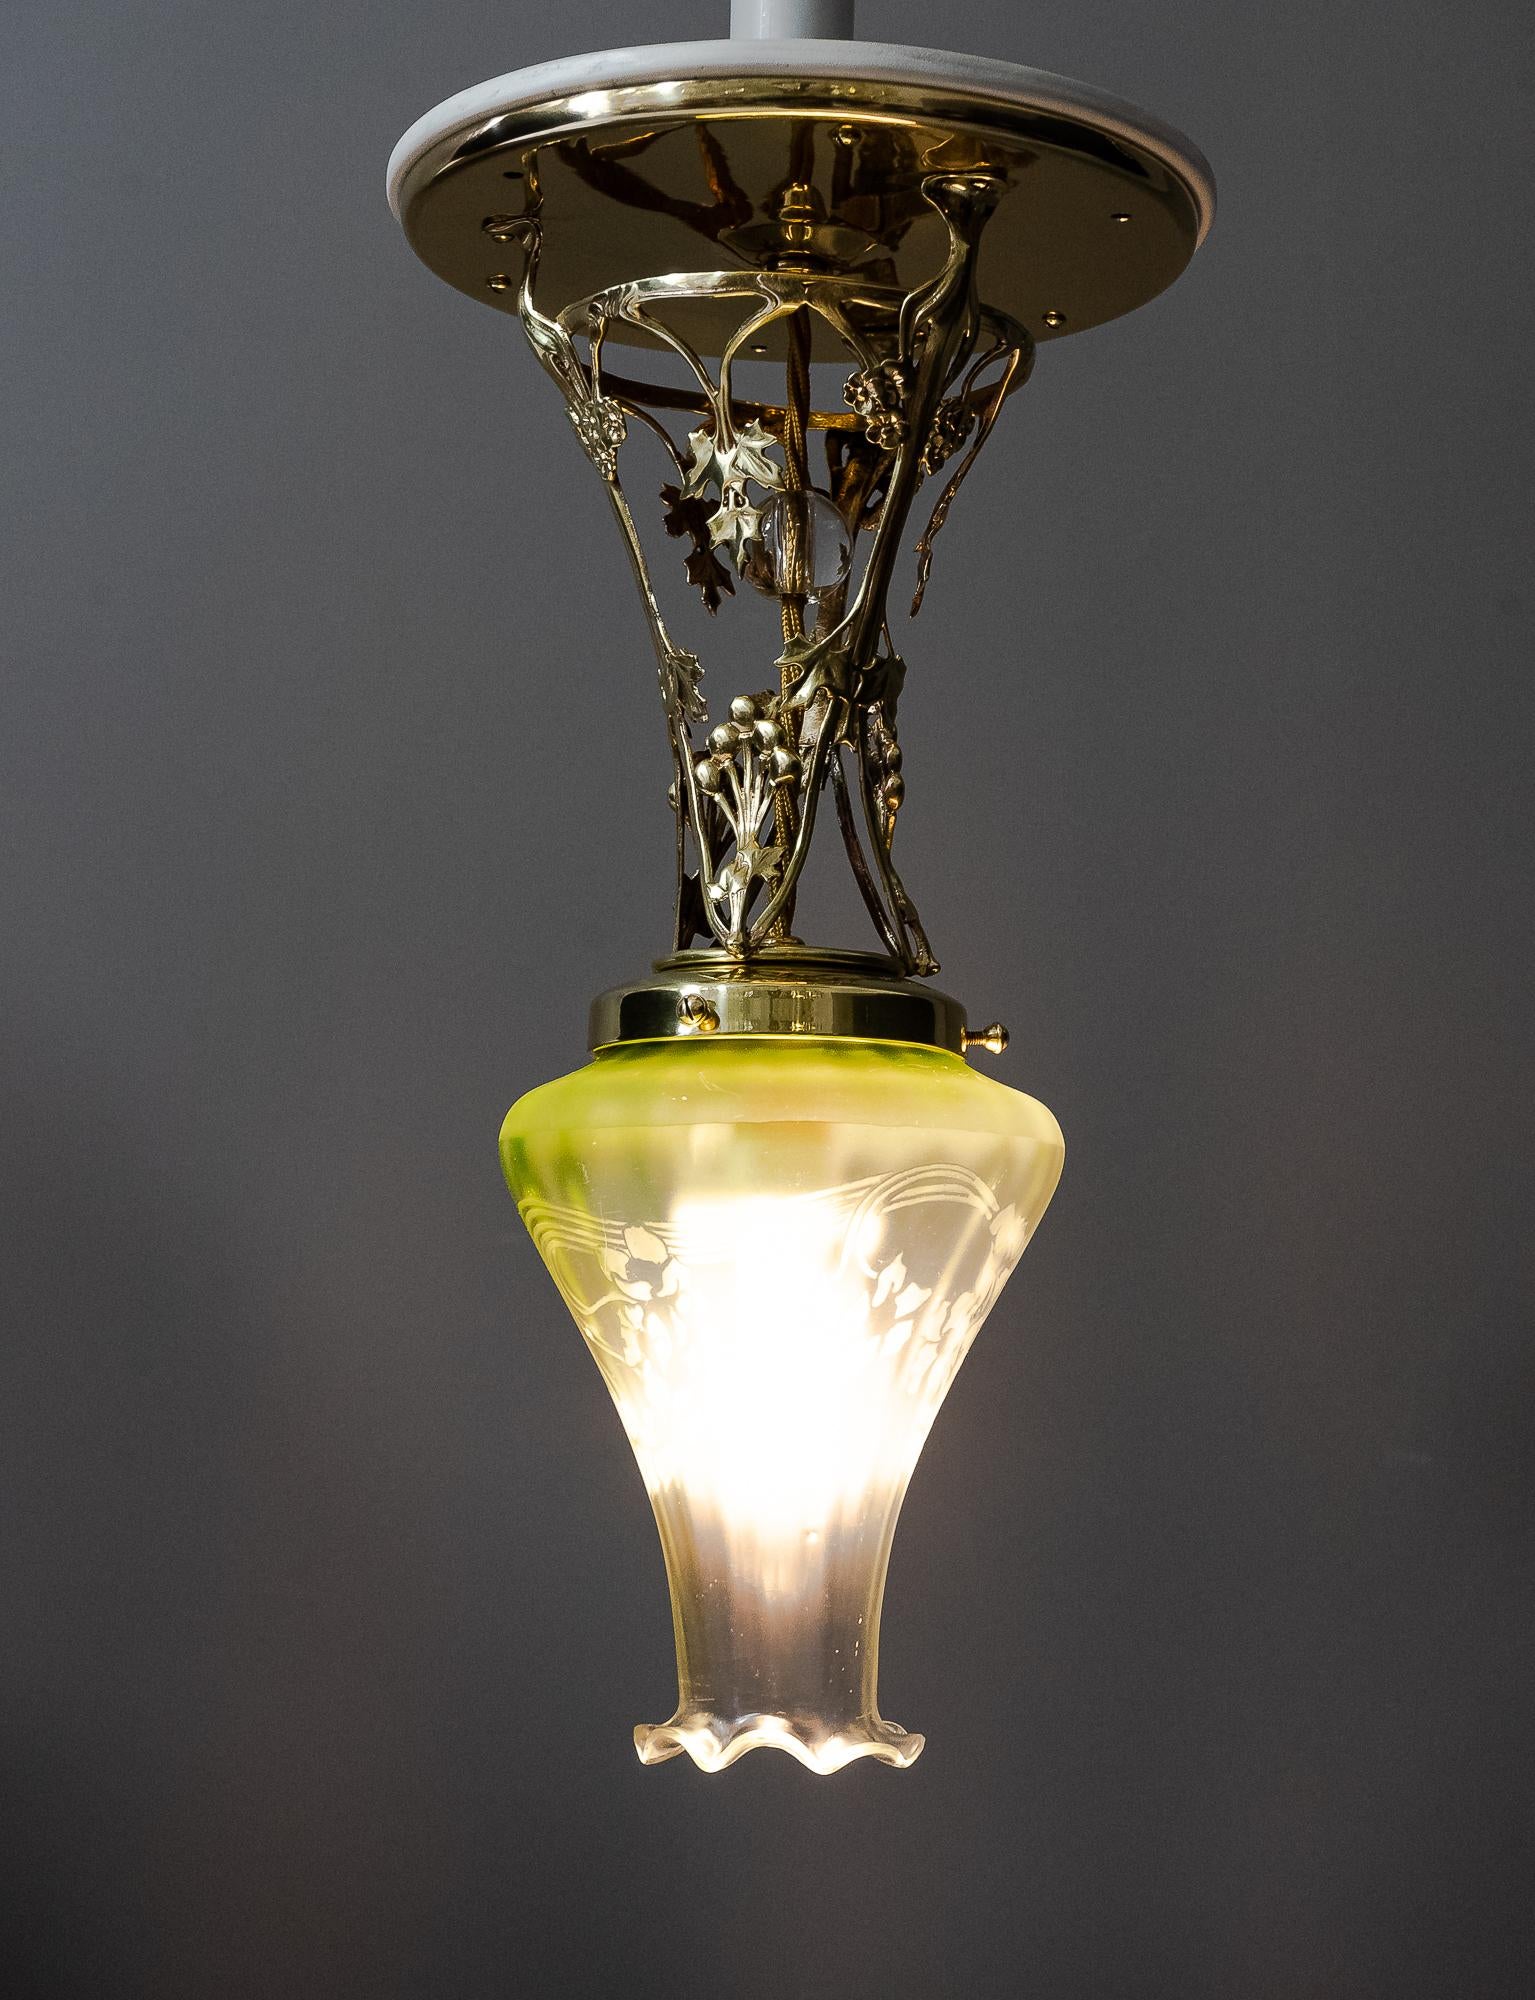 Jugendstil Ceiling Lamp Vienna circa 1908 with Original Glass Shade For Sale 5